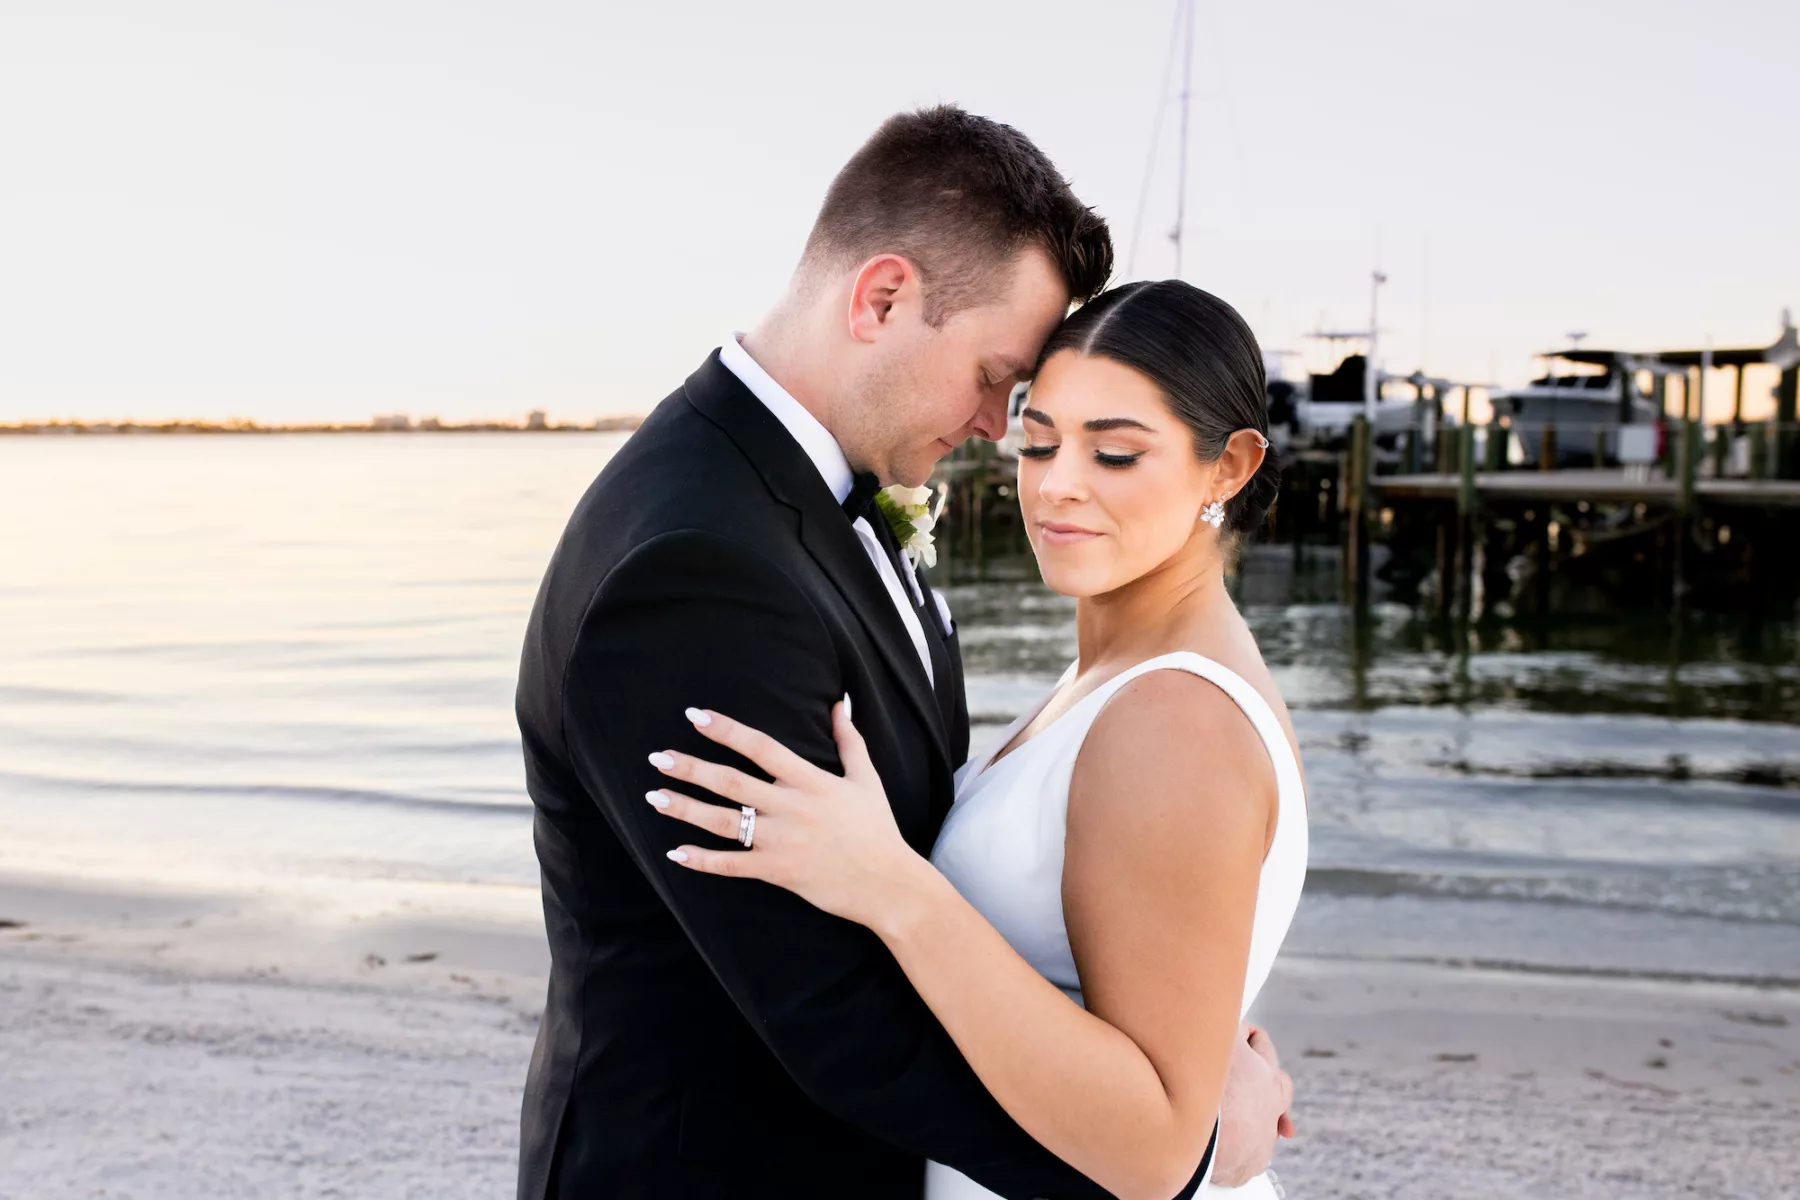 Romantic Bride and Groom Sunset Wedding Portrait | Elegant Updo Hair and Makeup Ideas | St Pete Hair and Makeup Artist Femme Akoi Beauty Studio | Venue Isla Del Sol Yacht & Country Club